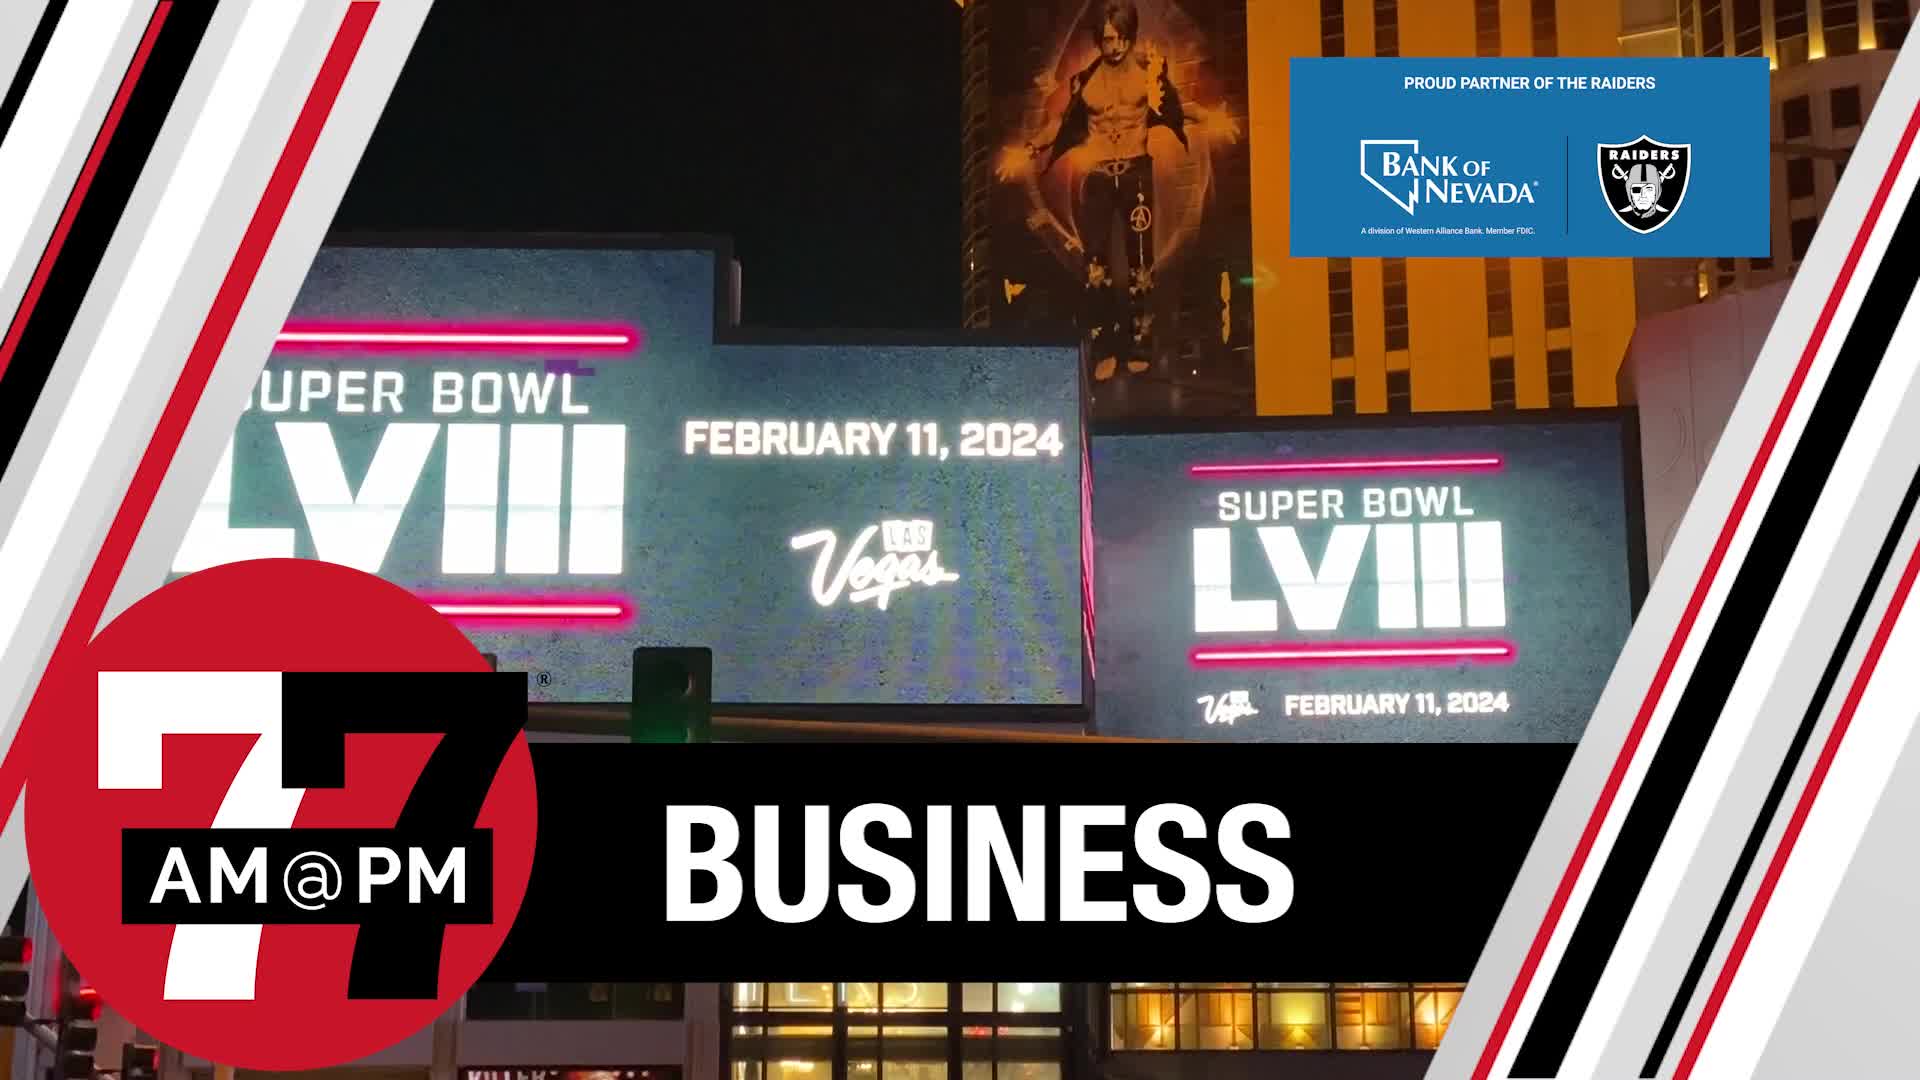 150 businesses accepted into super bowl program